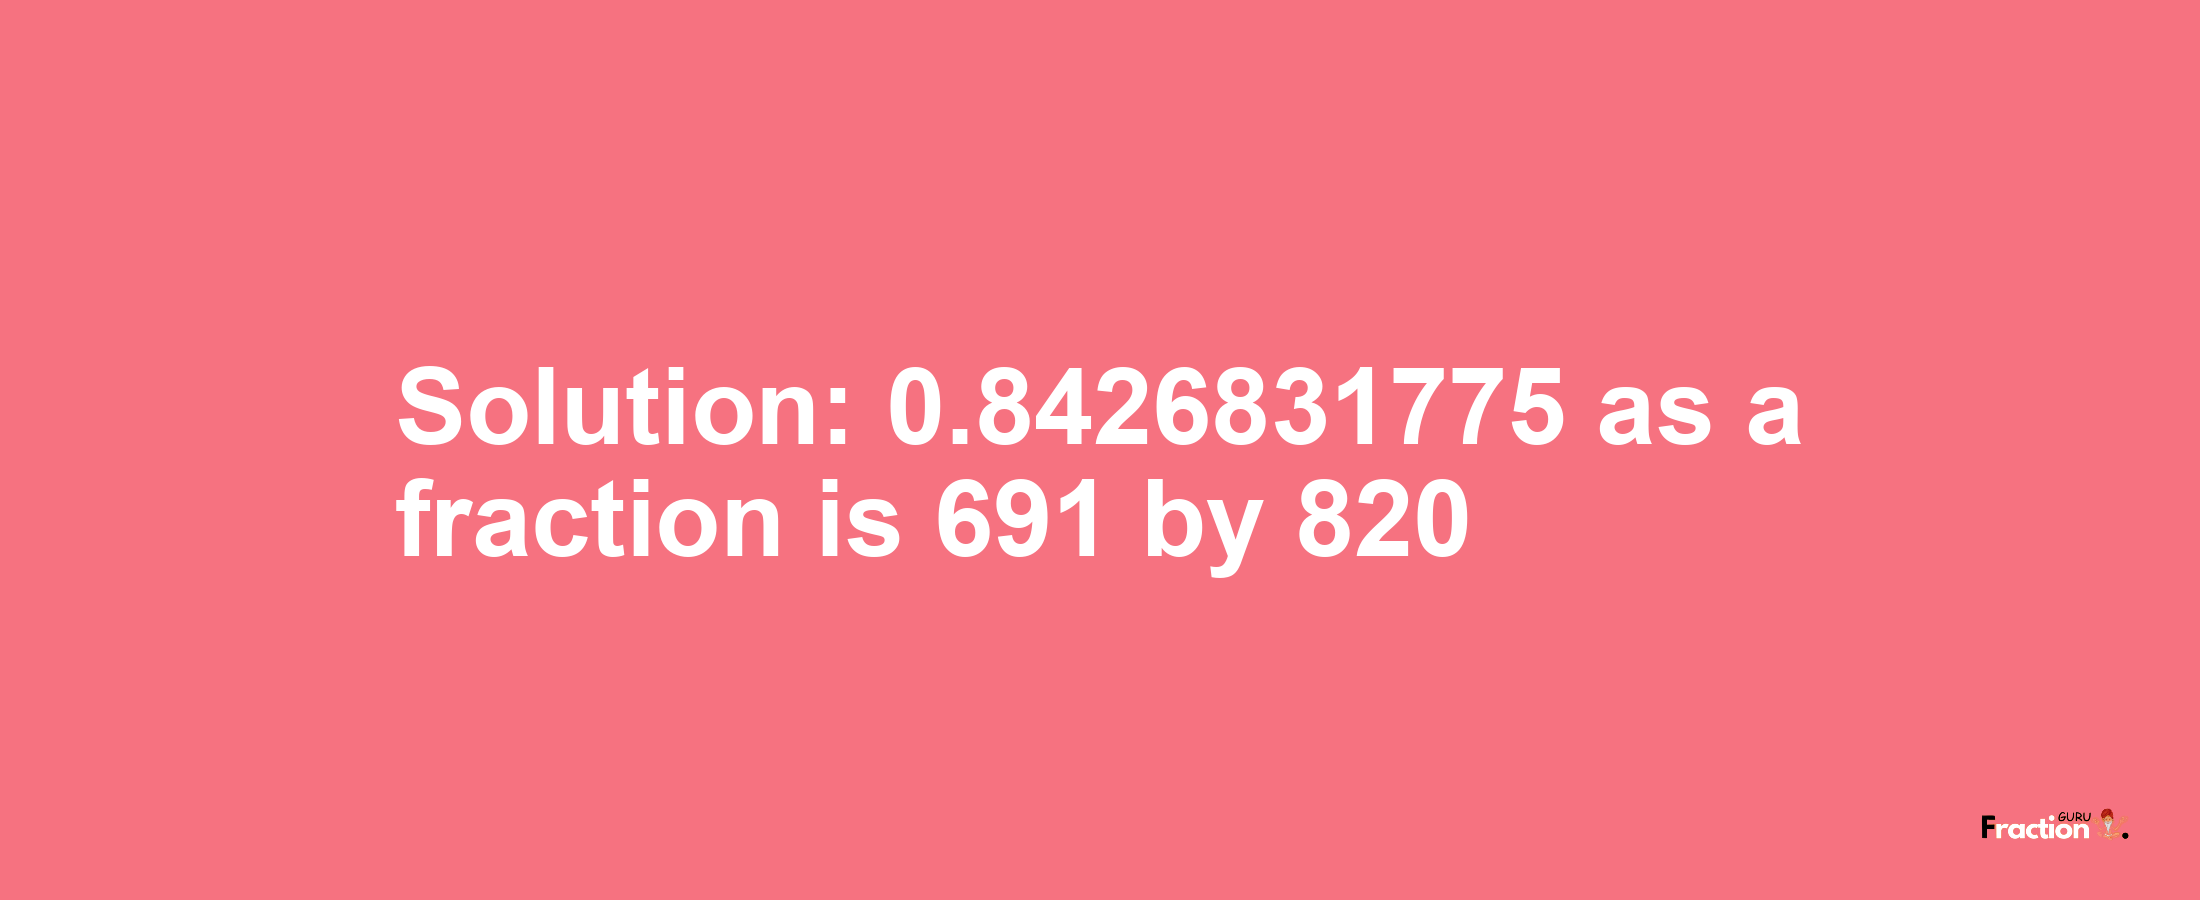 Solution:0.8426831775 as a fraction is 691/820